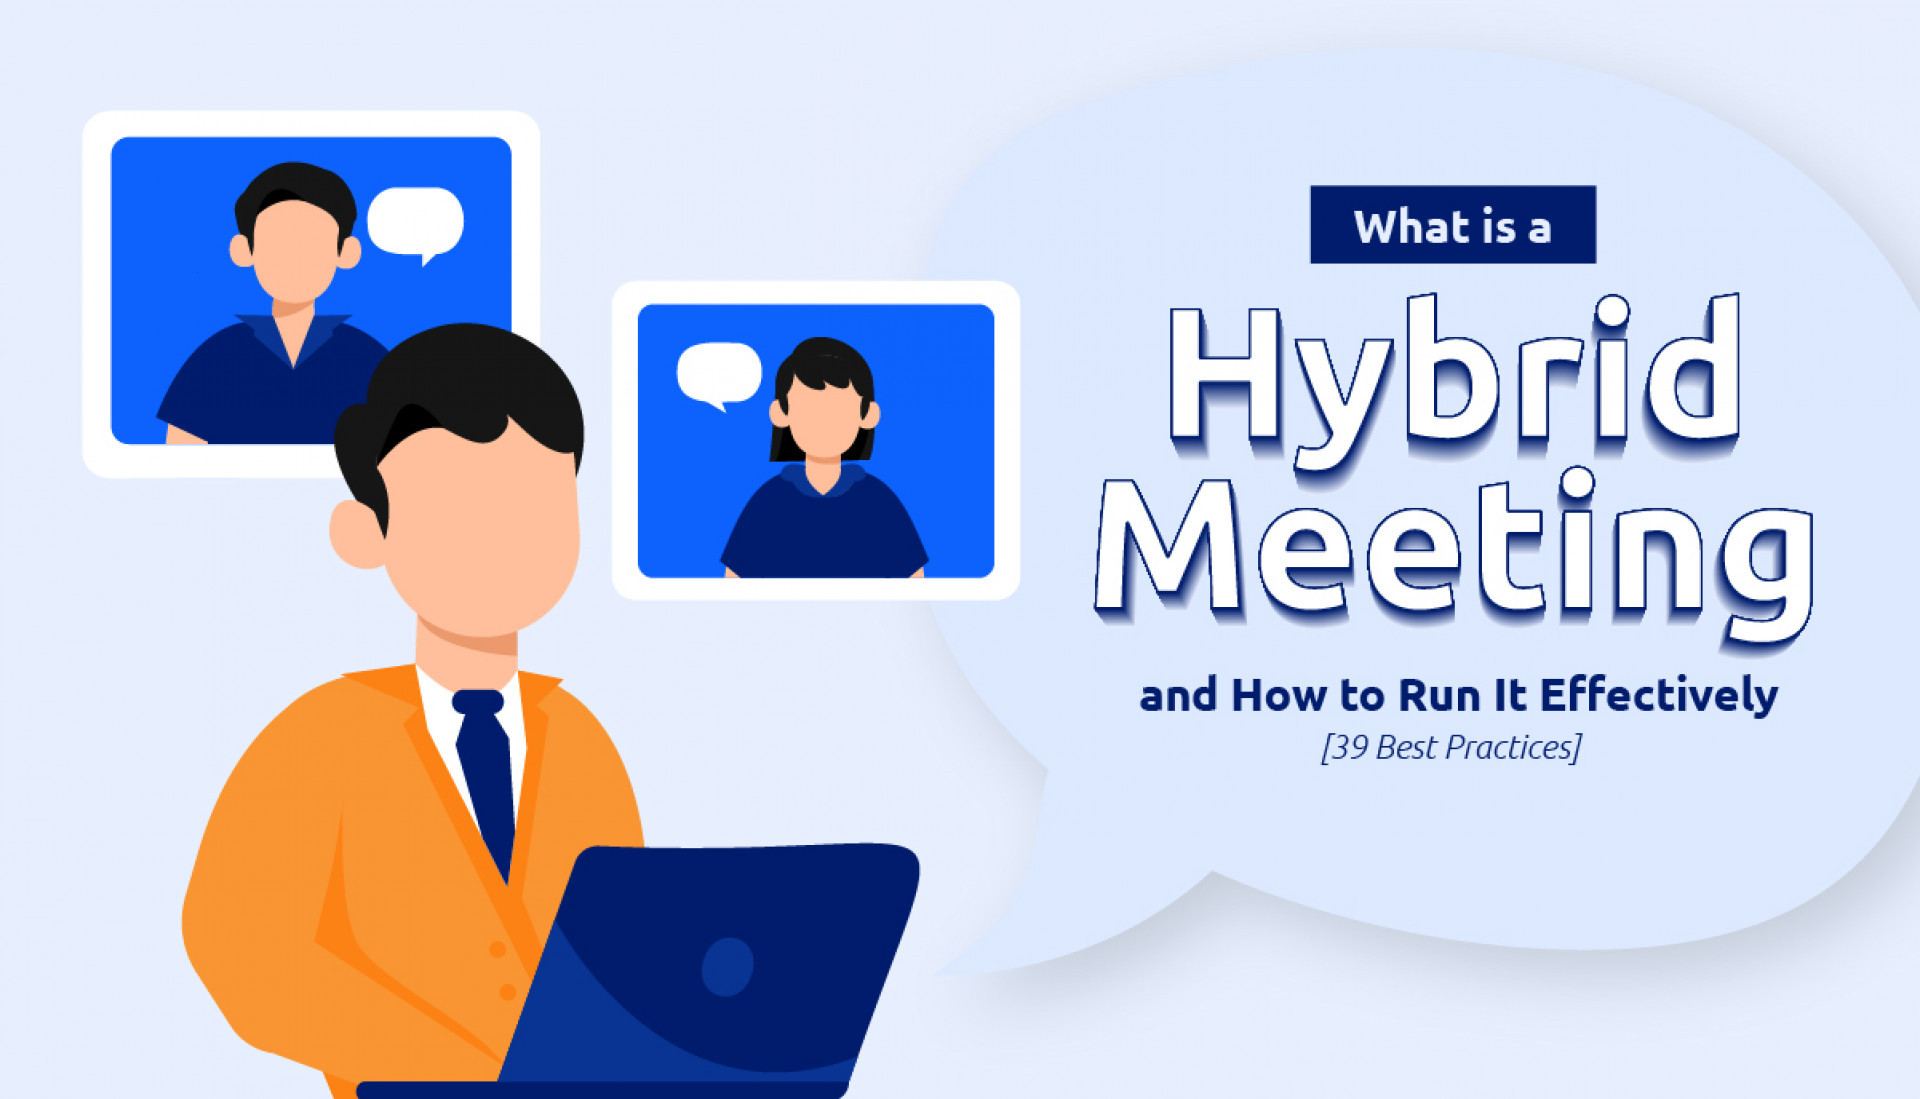 17 Virtual Icebreakers for Hybrid and Remote Meetings